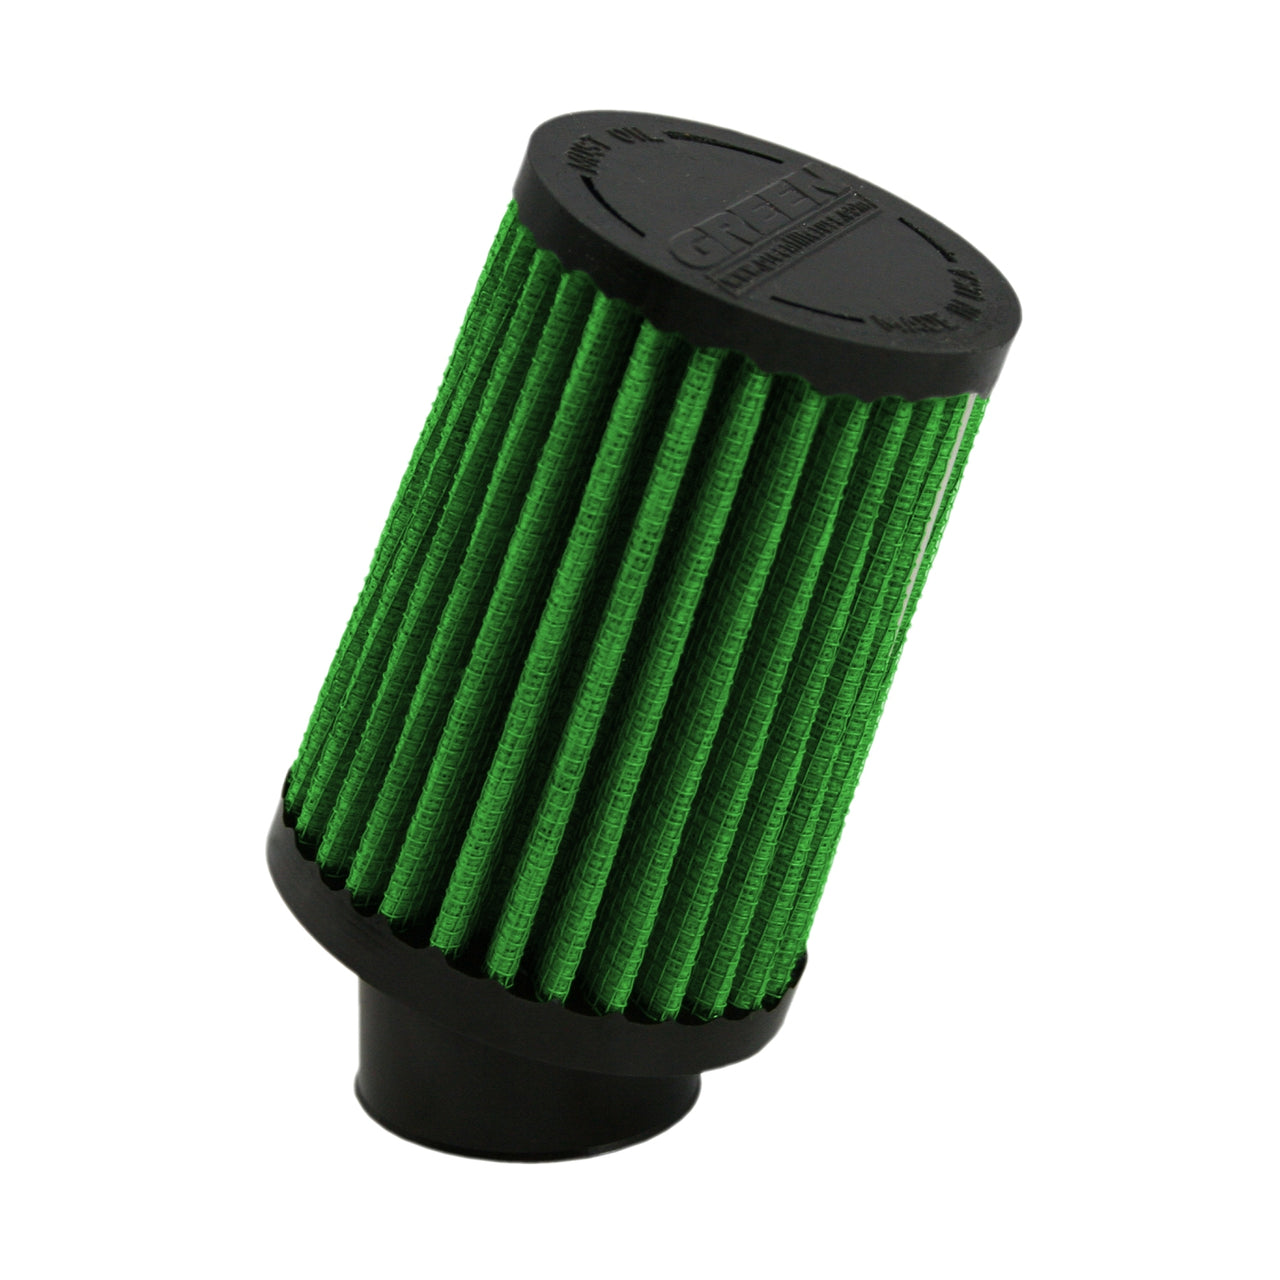 Green Filter Kart Cone Angled Filter - ID 1.25in. / Bse 2.75in. / Top 2.5in. / H 4in.